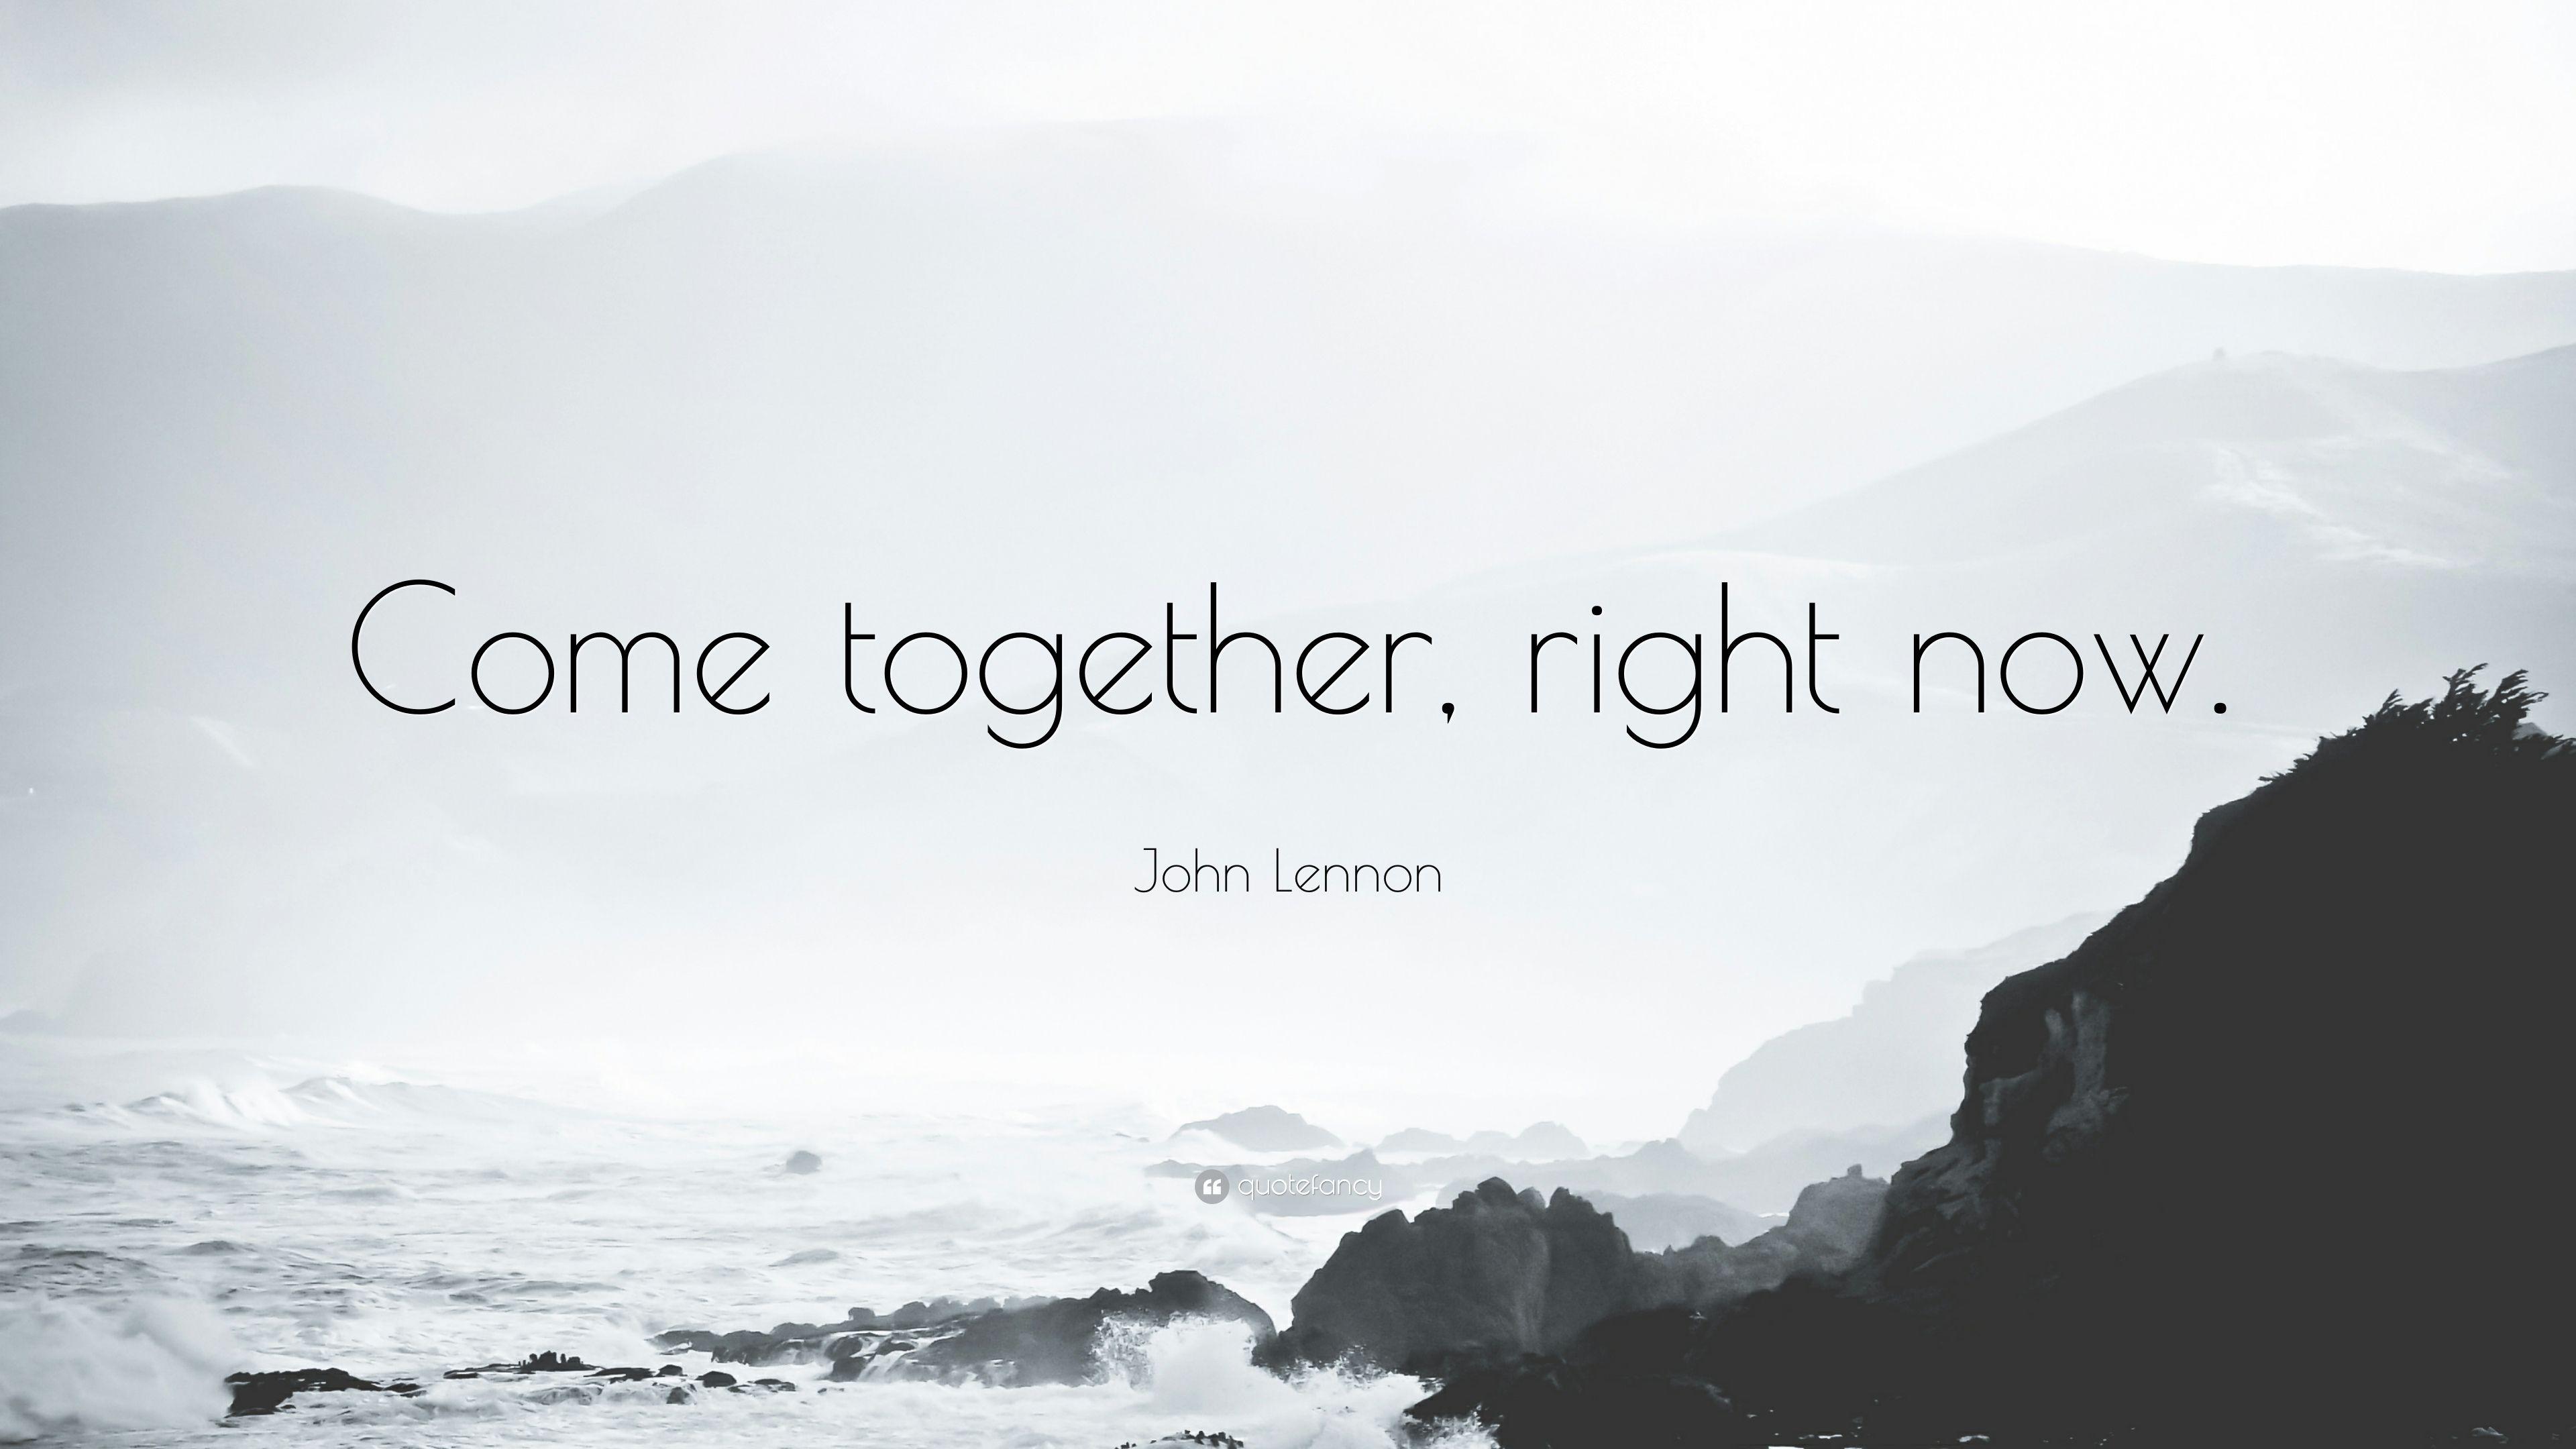 John Lennon Quote: “Come together, right now.” 7 wallpaper